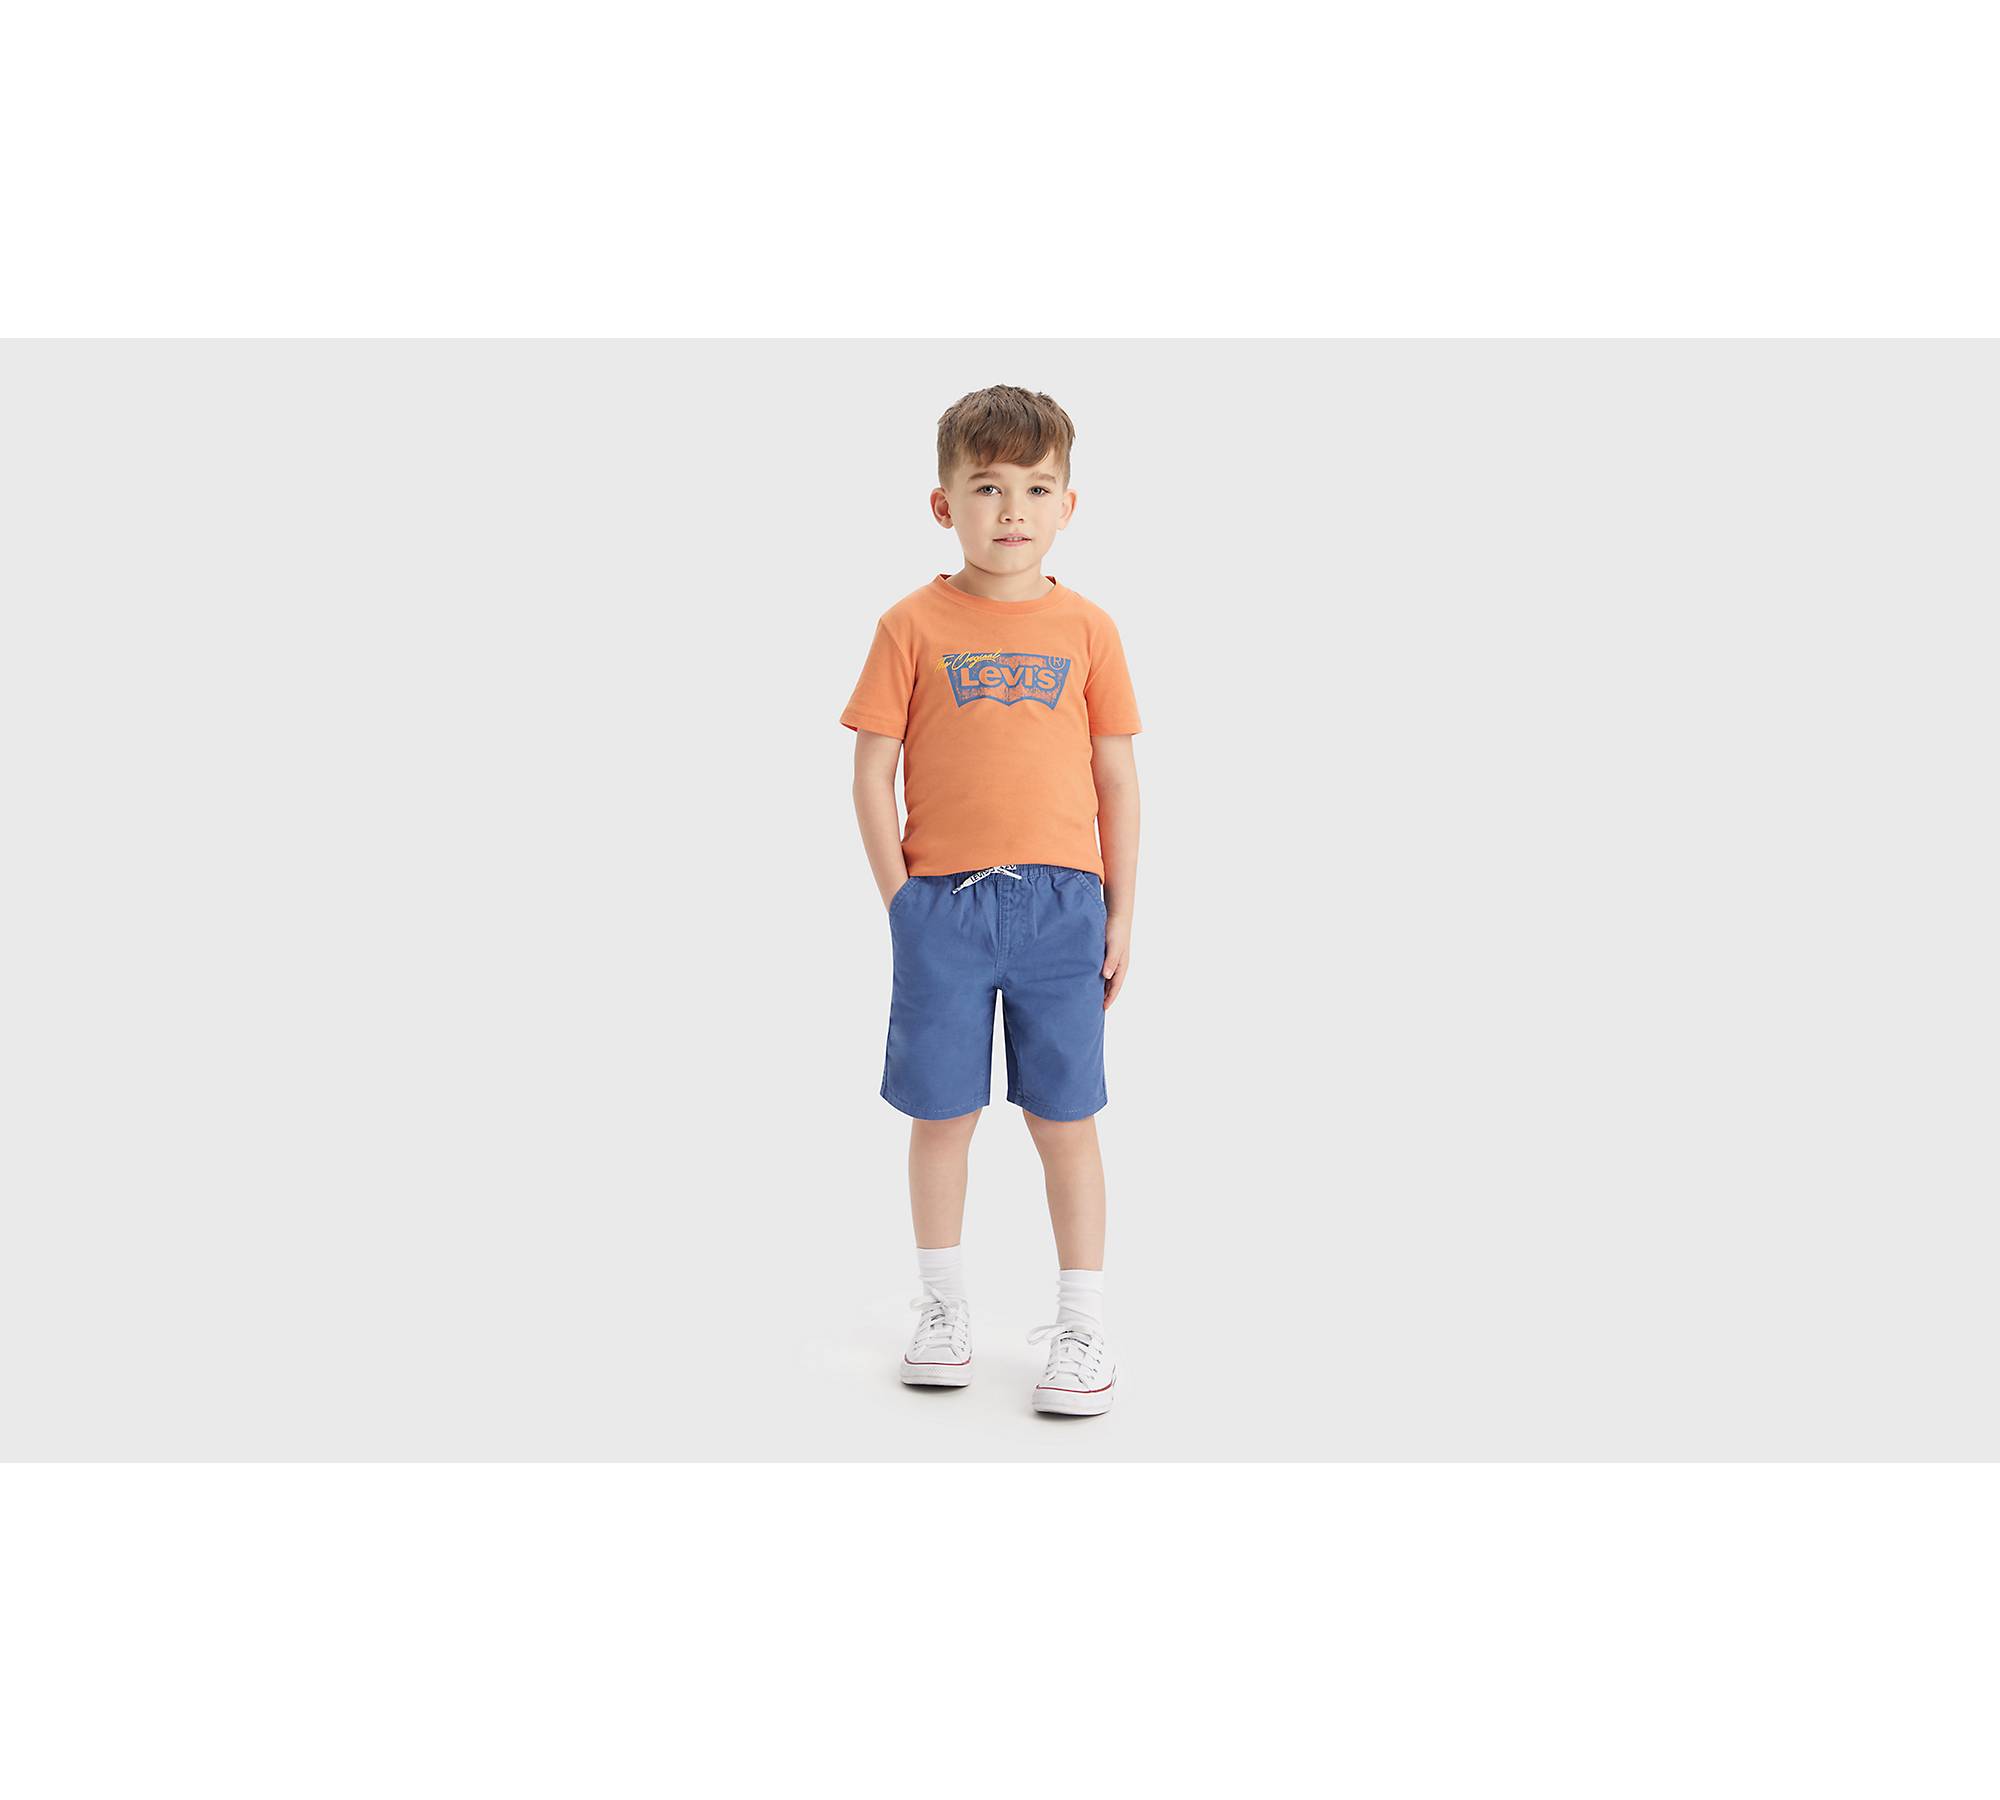 Kids Woven Pull-On Shorts 1